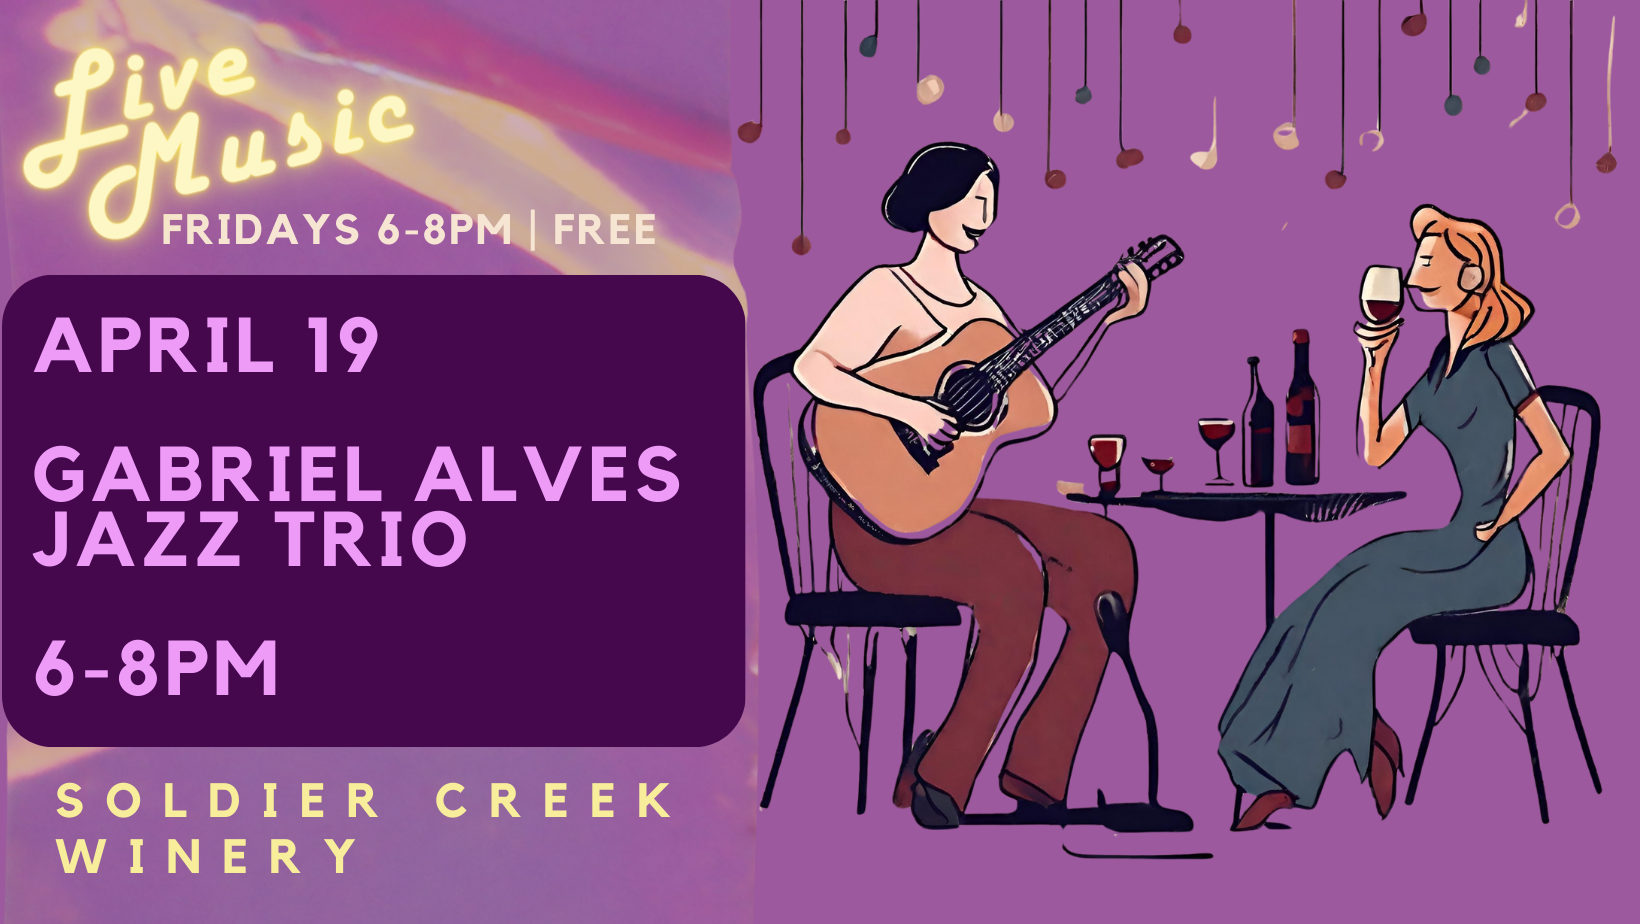 free live music every friday at soldier creek winery. april 19 is the gabriel alves jazz trio